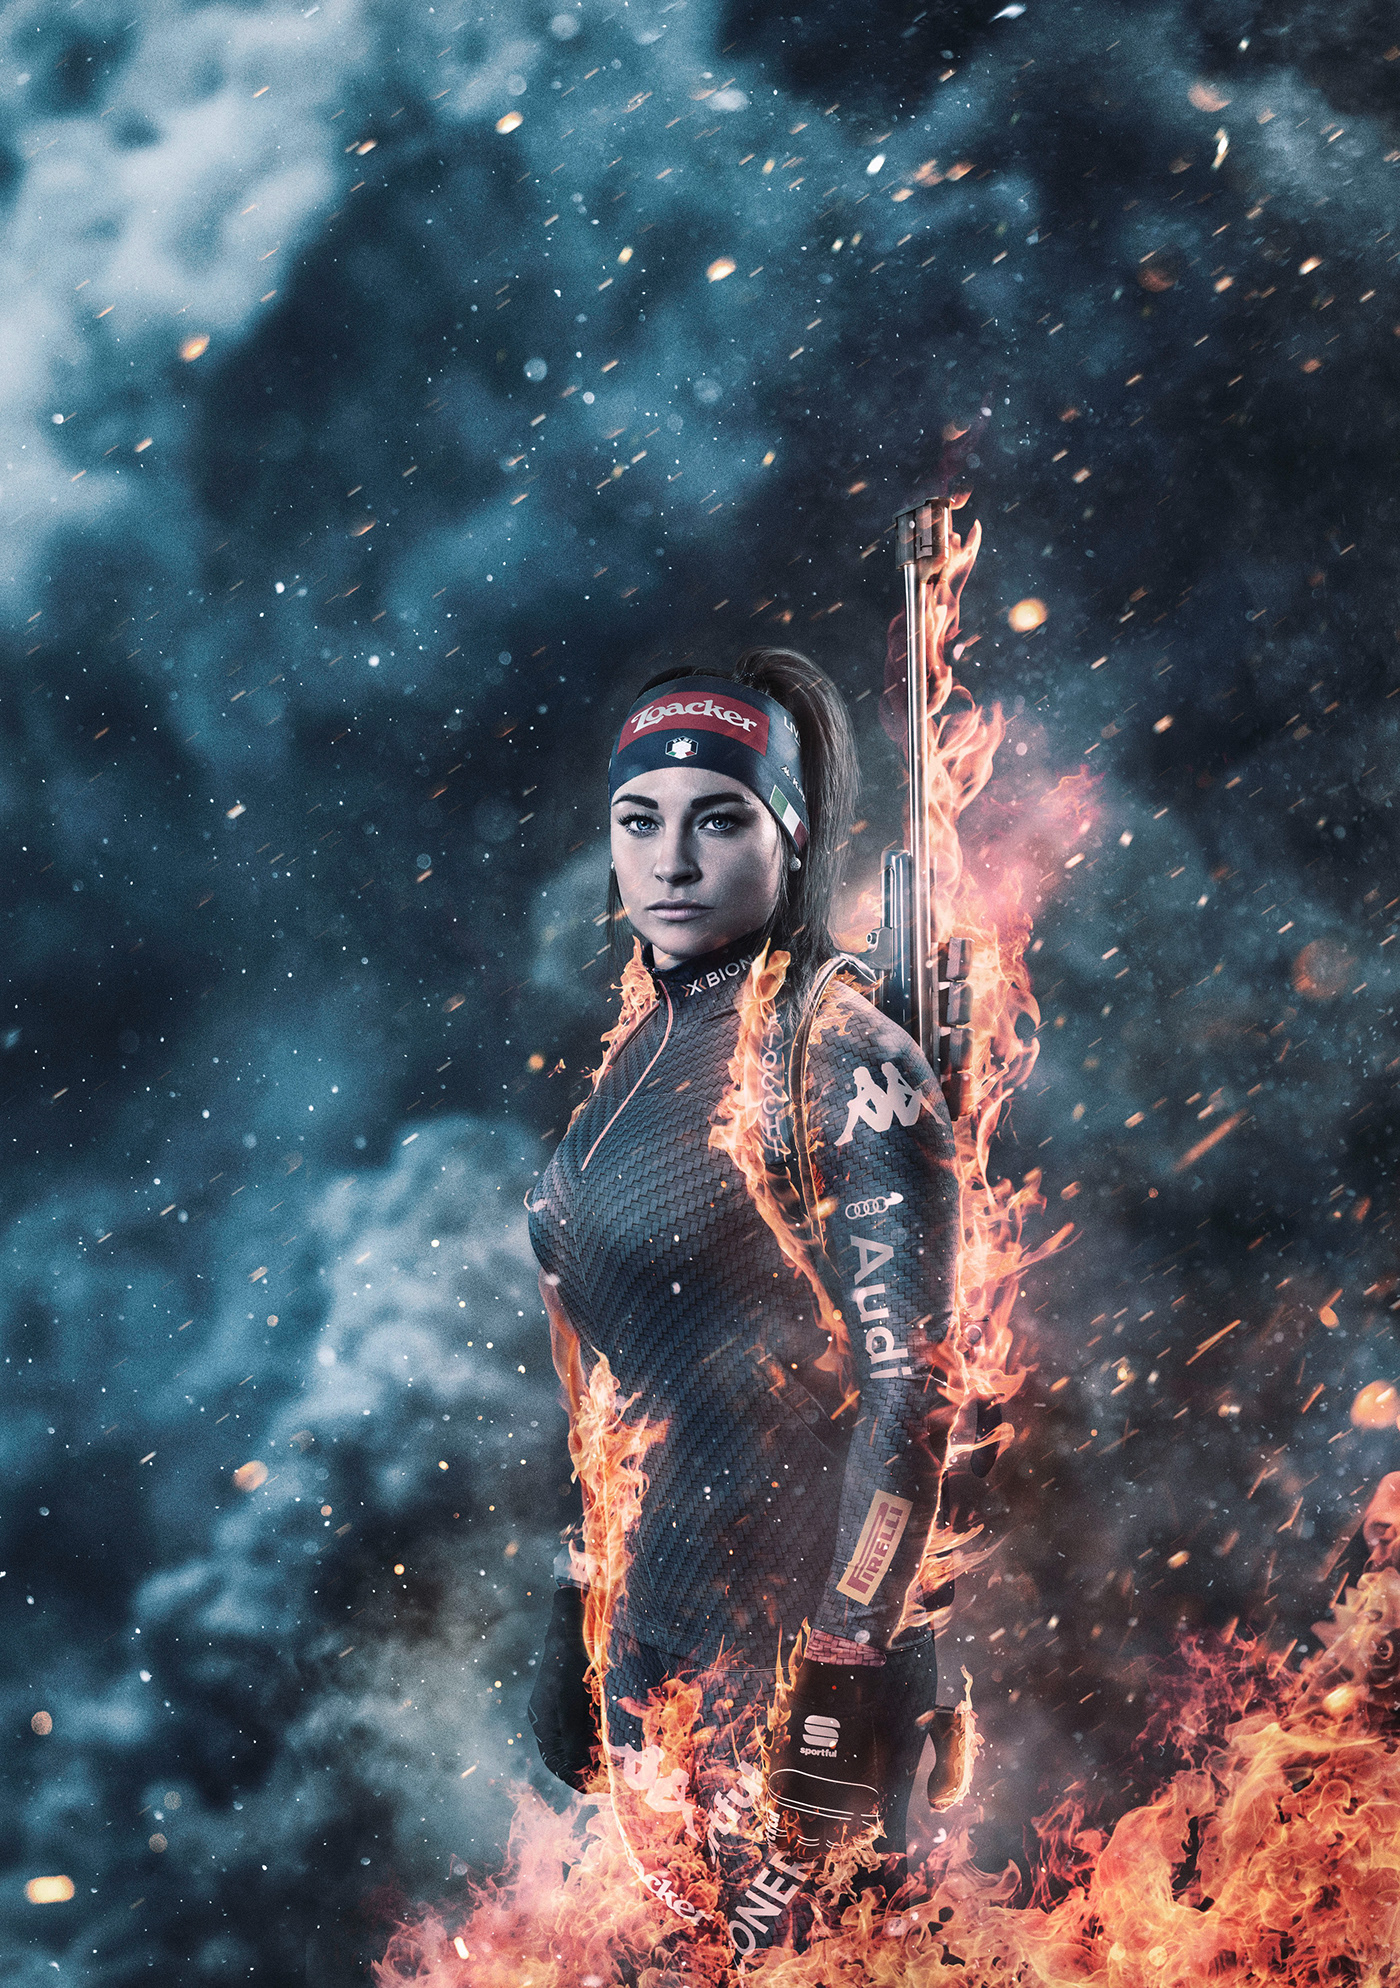 retouch draw color composing look digital painting Creative Director fire ice sport